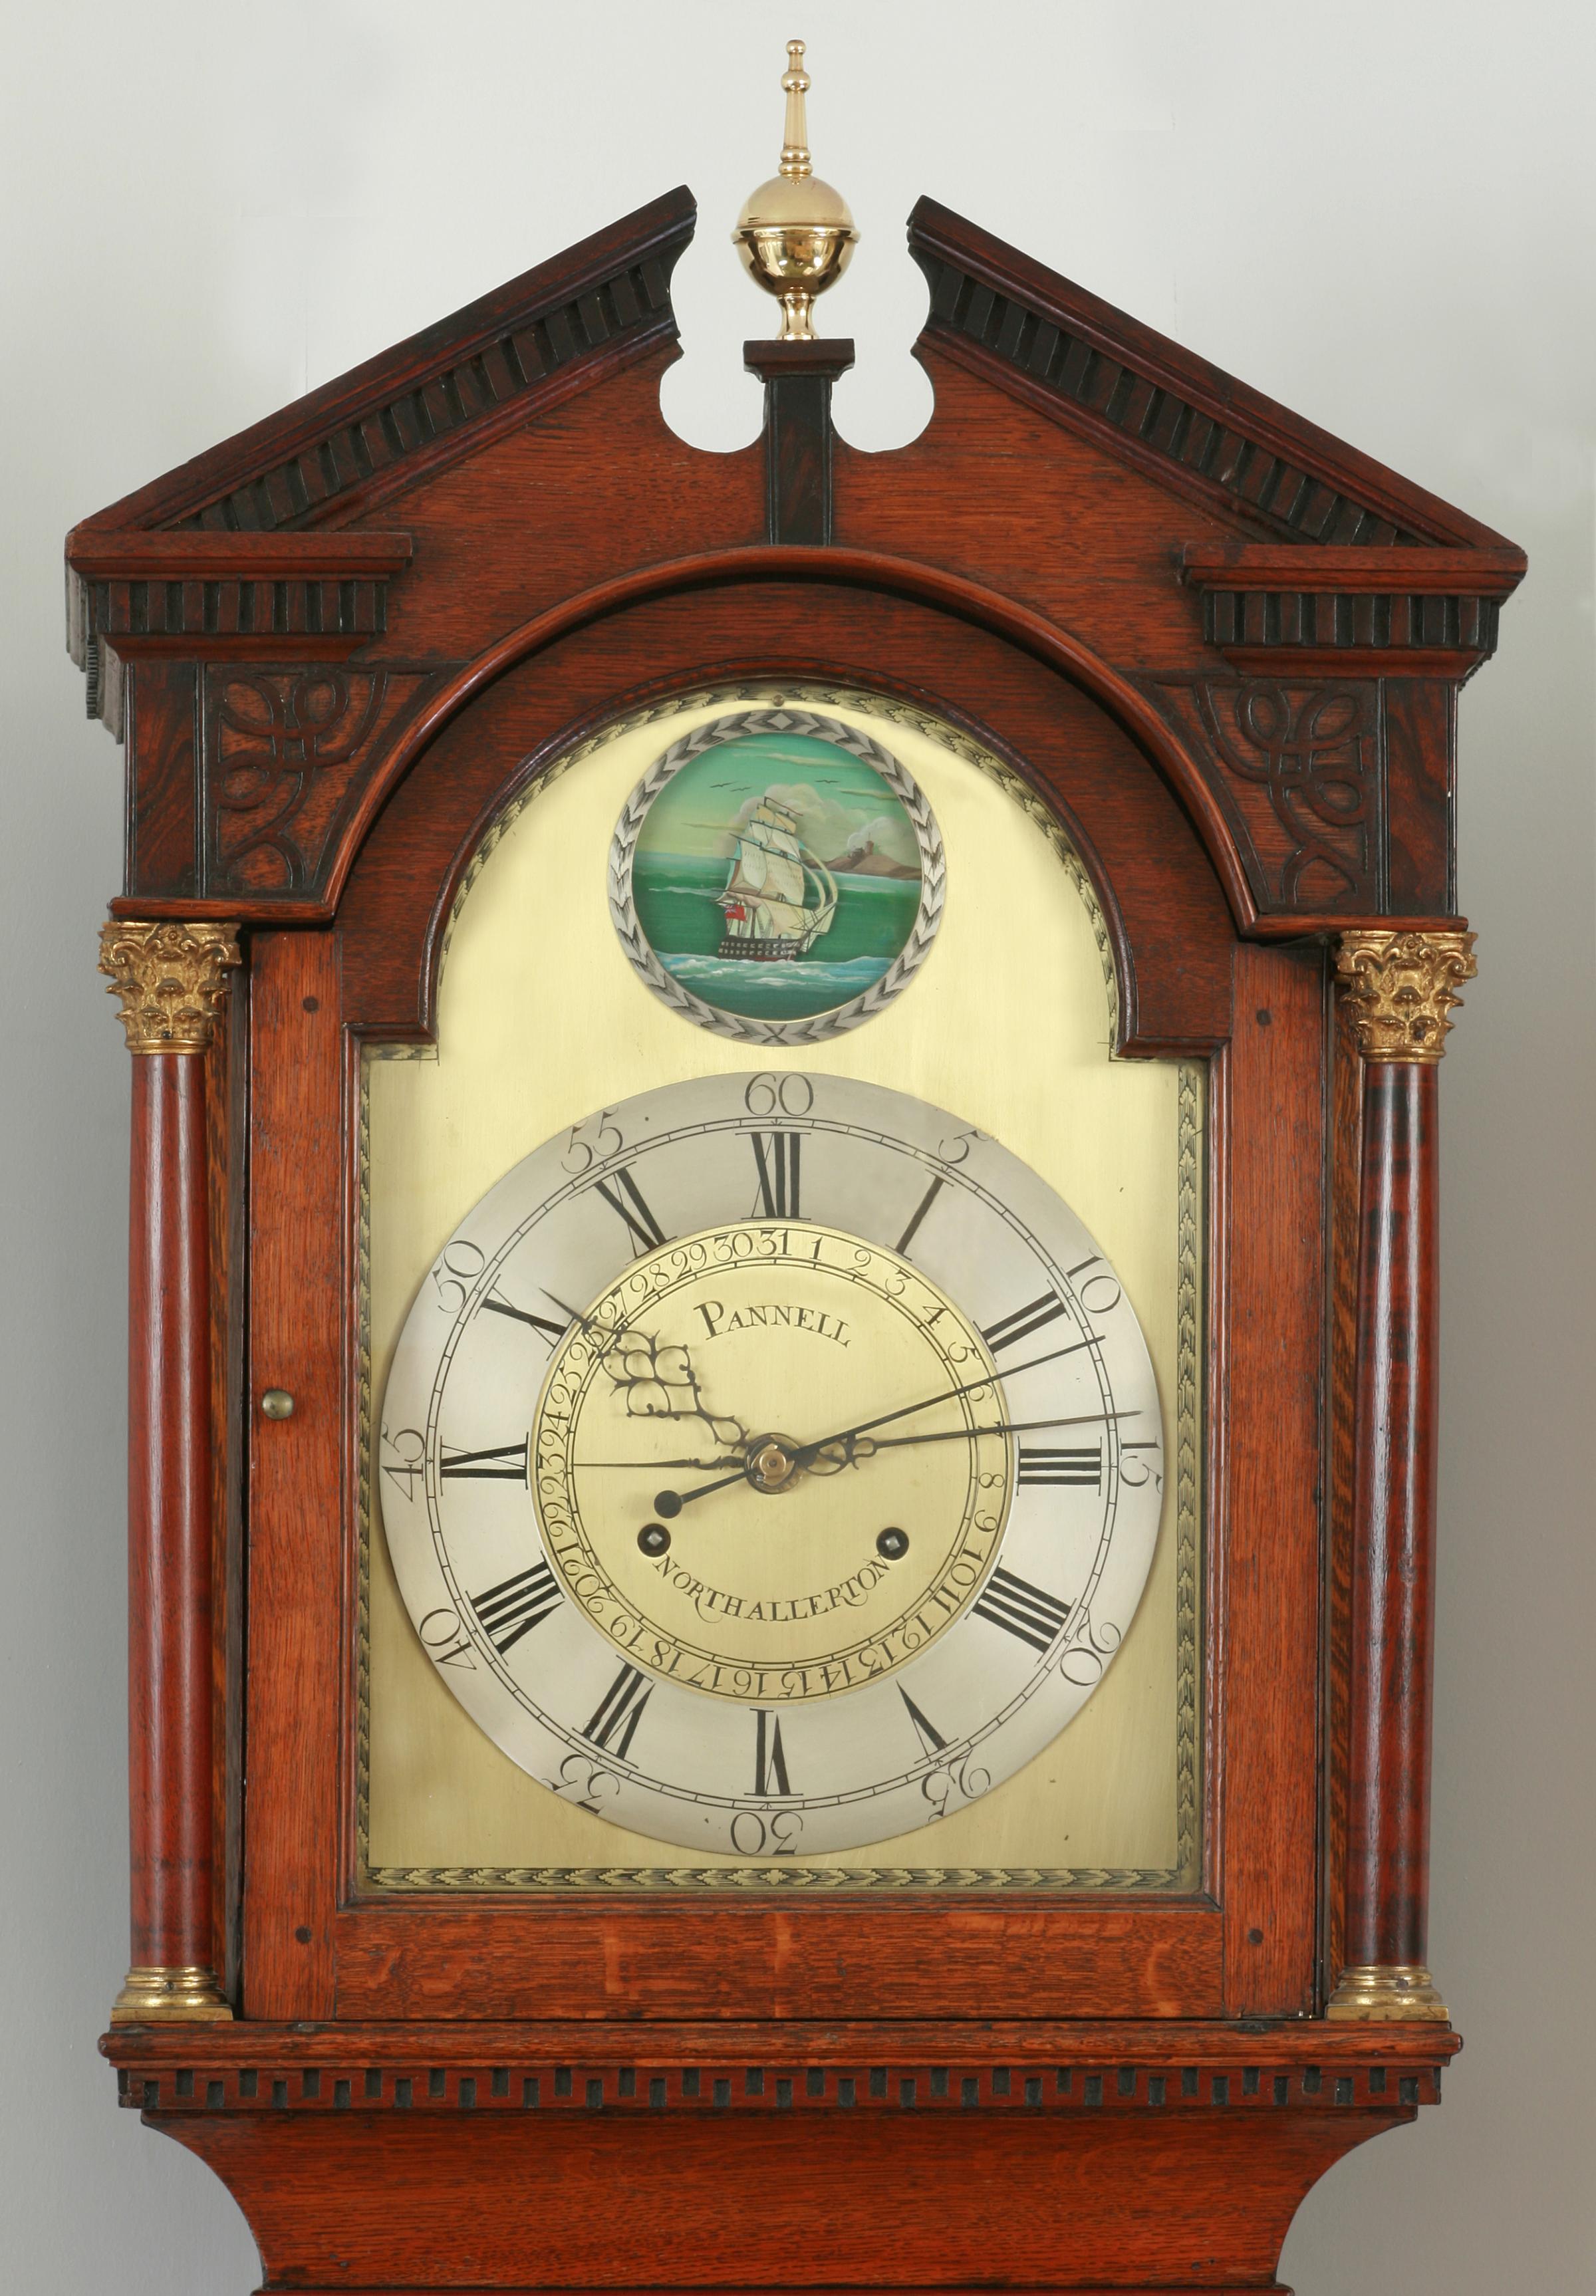 A very complicated clock made by Hugh Pannell of Northallerton. Not only does it tell the time, but it has a second hand, a rocking ship at the top and also a central dial which tells which day of the month it is. Picture courtesy of David Severs